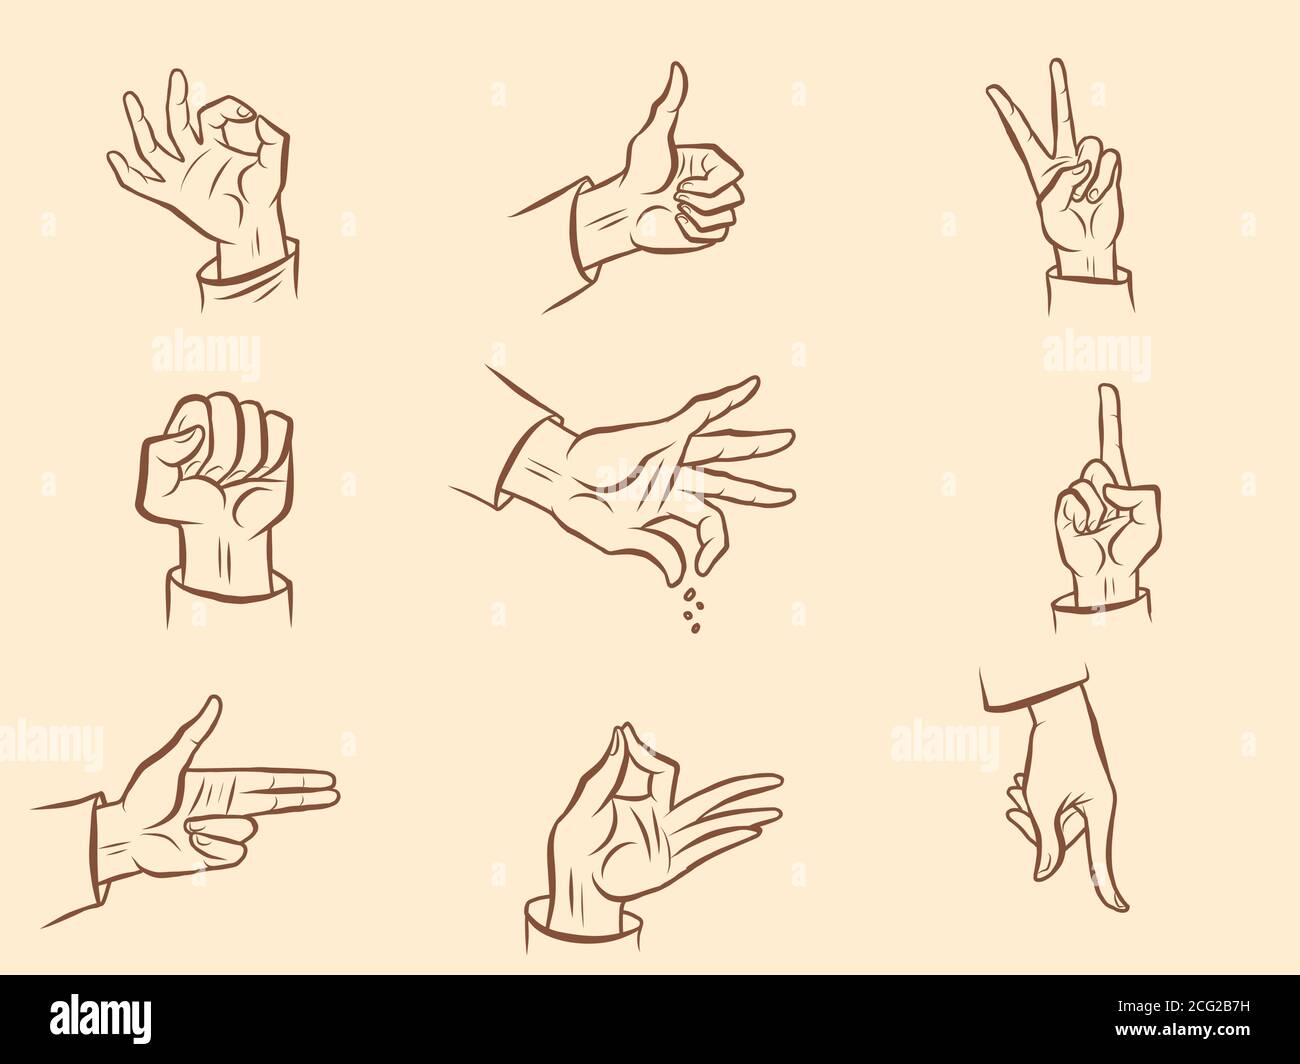 Hand Gestures PNG Image Hand Drawing Of Various Gesture Vectors Hand  Gesture Posture PNG Image For Free Download